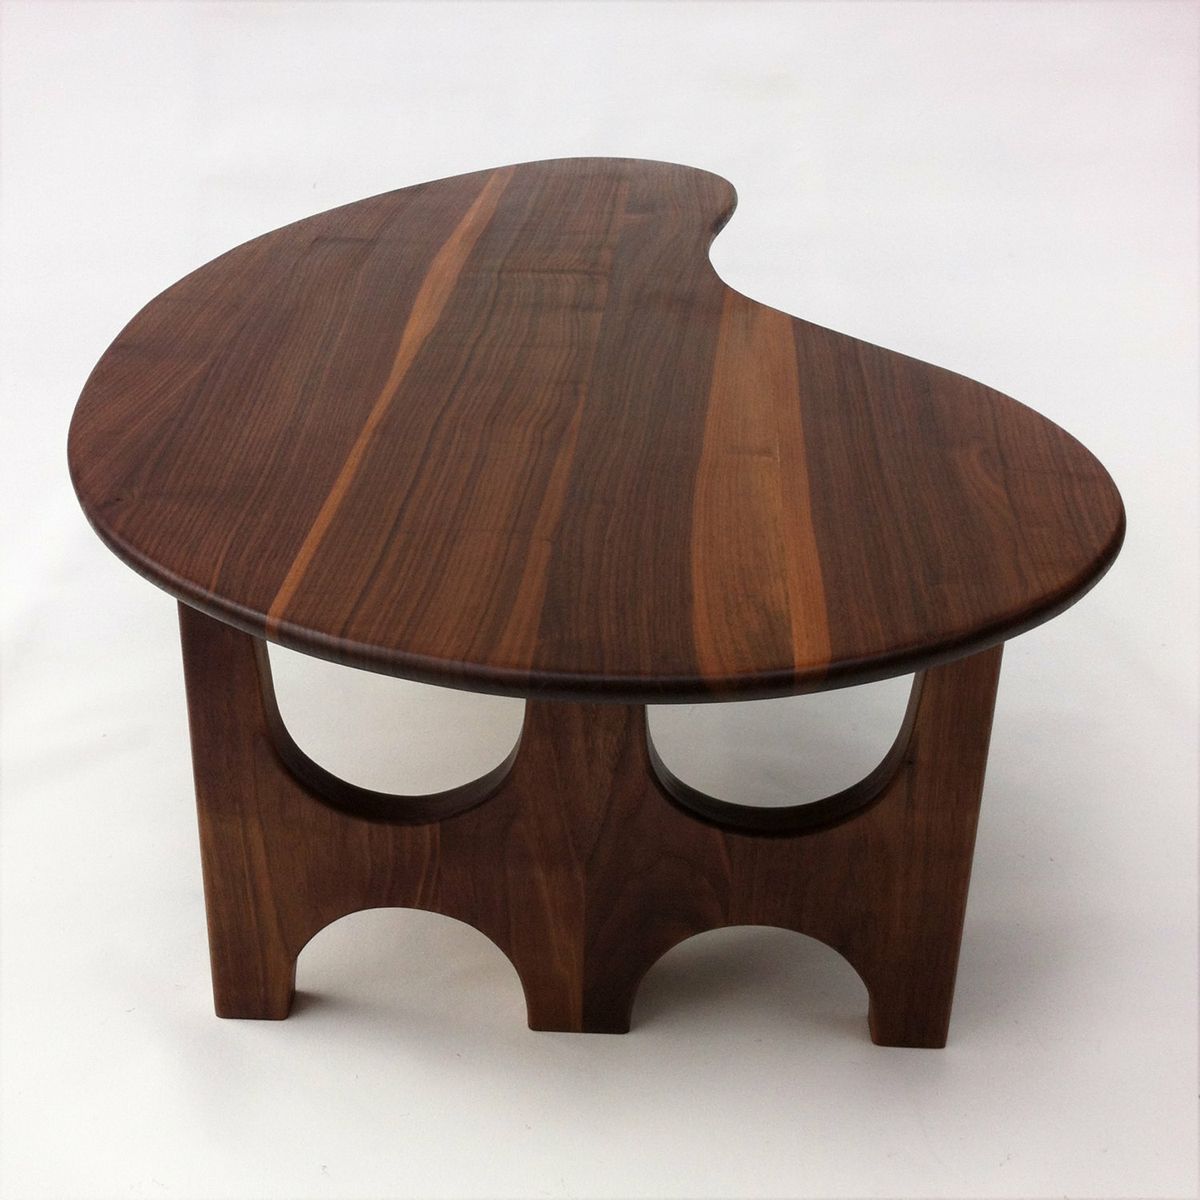 Buy A Custom Made Coffee Cocktail Table With Trident Base Made Of